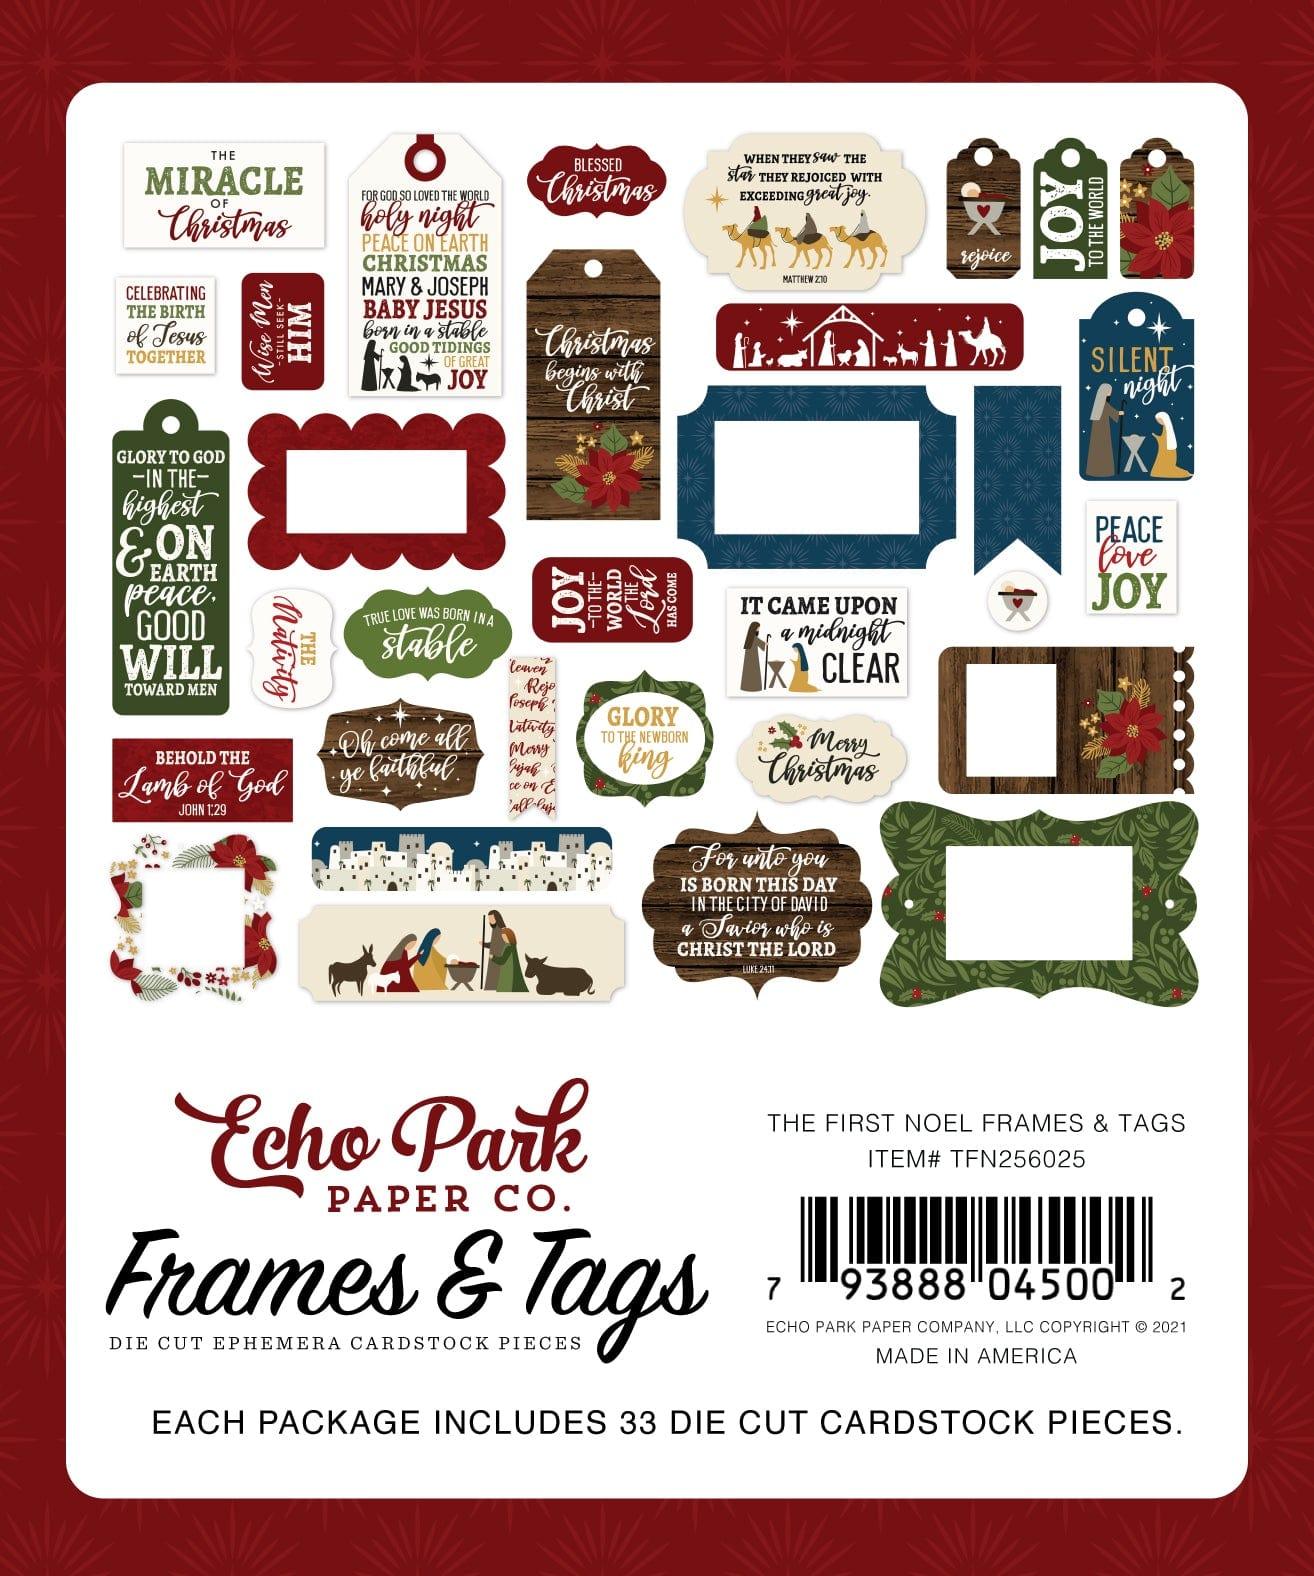 The First Noel Collection 5 x 5 Scrapbook Tags & Frames Die Cuts by Echo Park Paper - Scrapbook Supply Companies